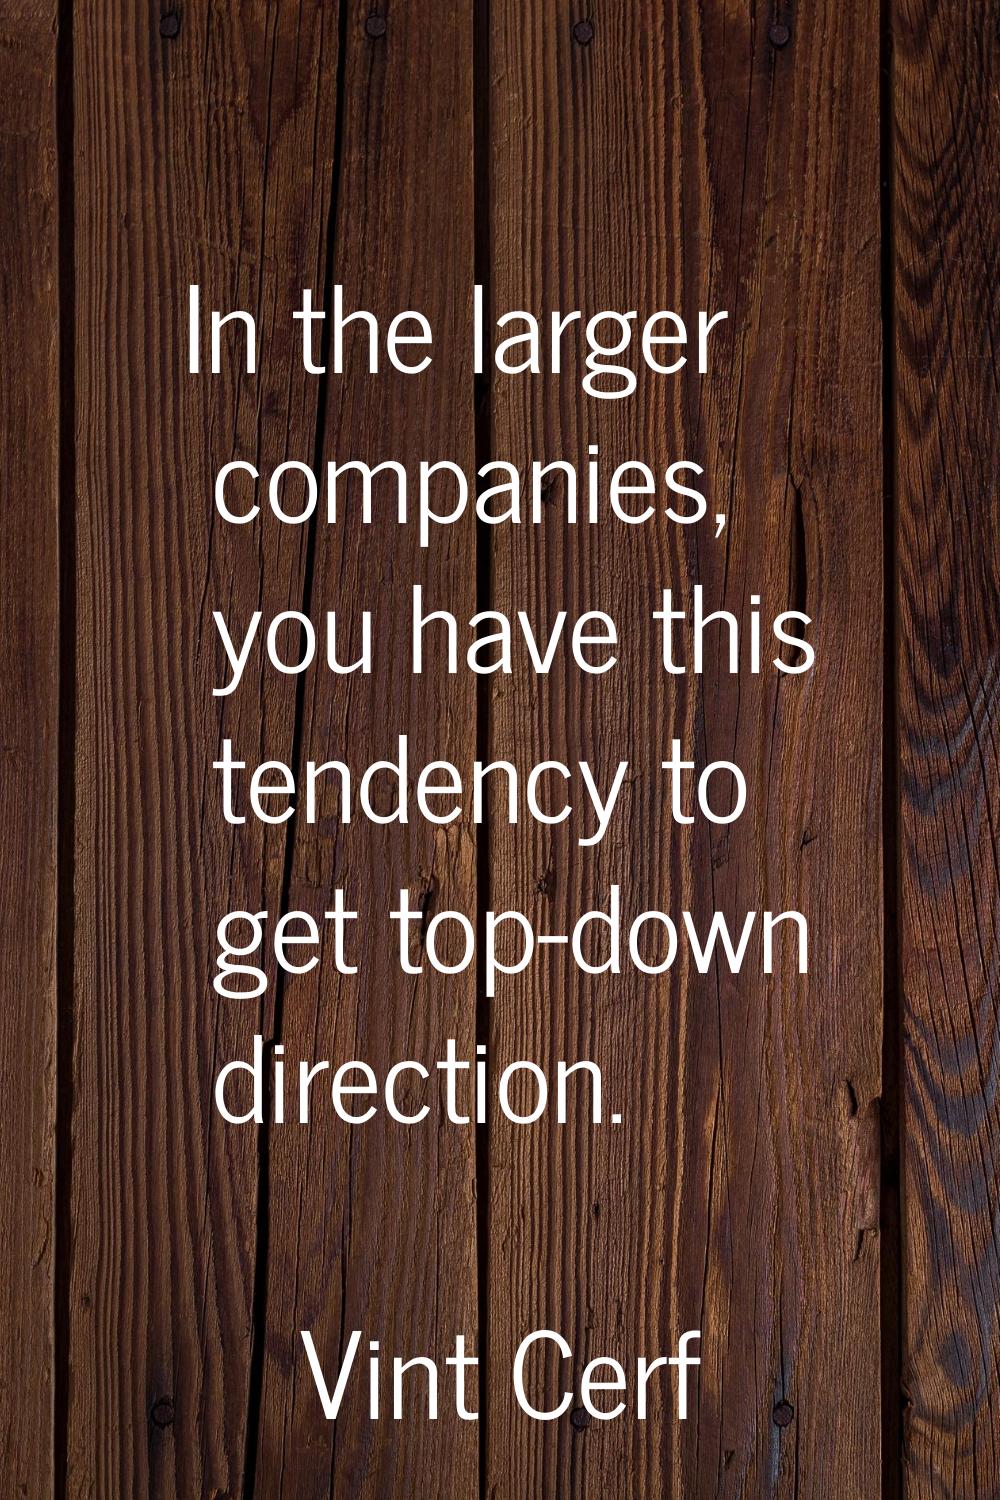 In the larger companies, you have this tendency to get top-down direction.